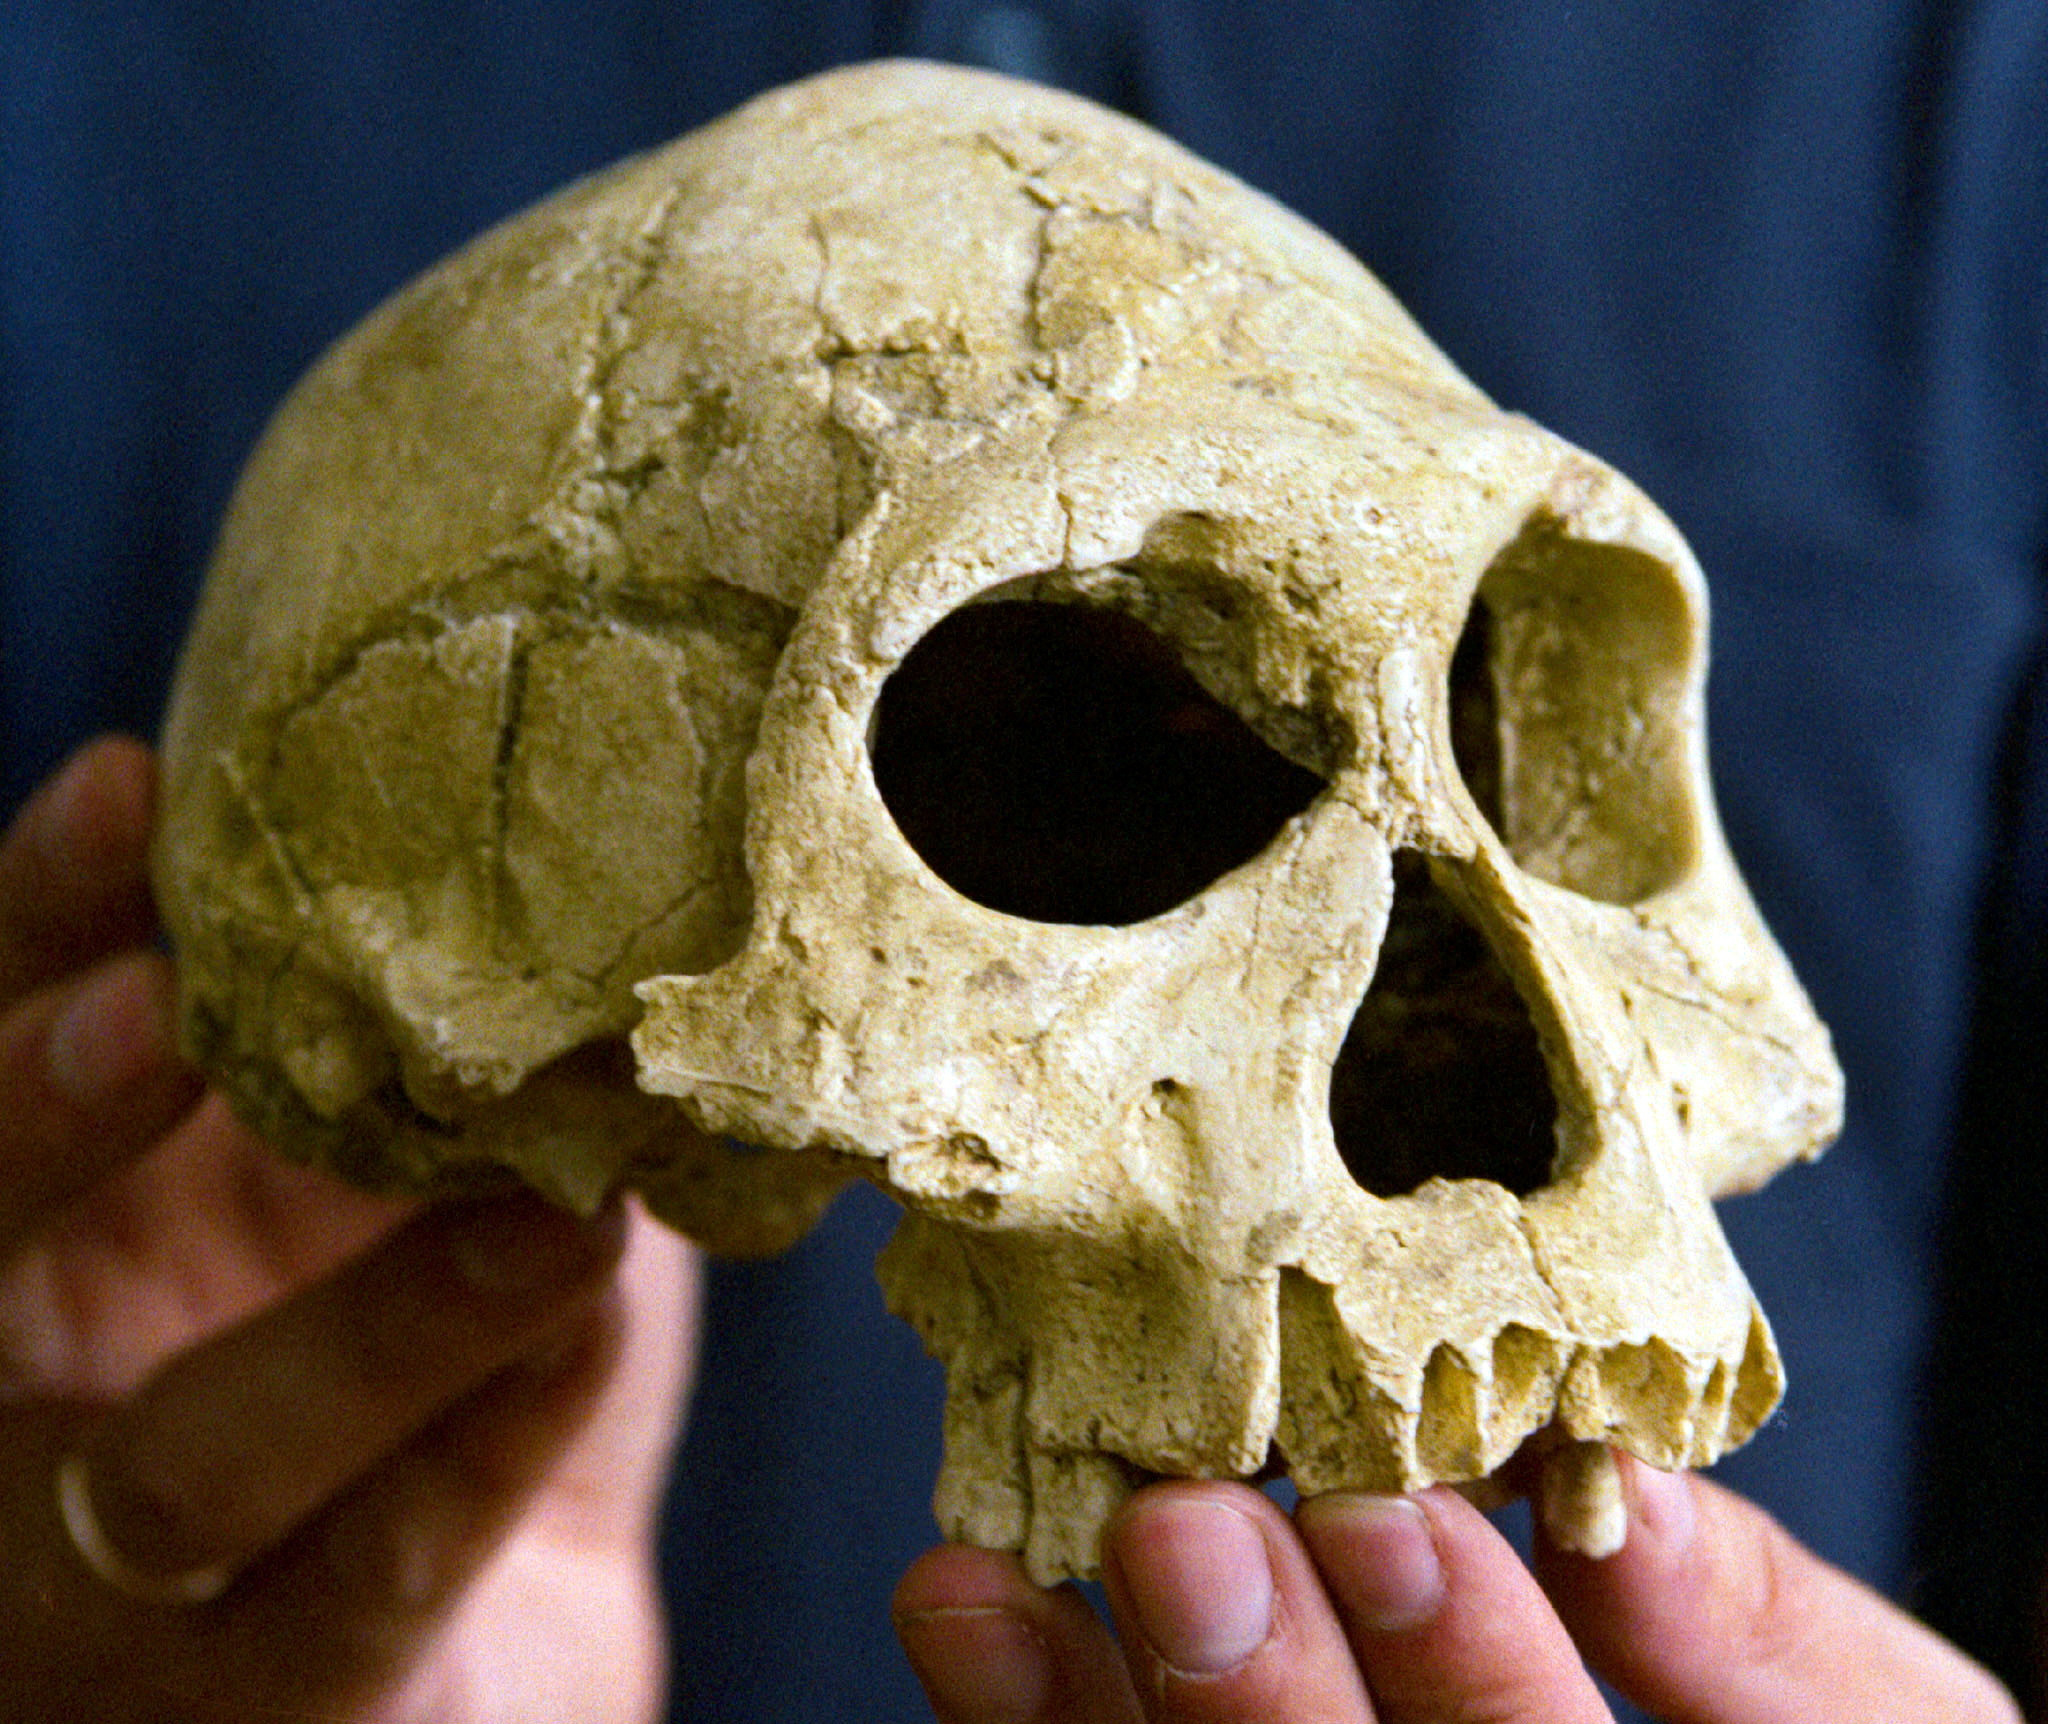 The skull of the early human species Homo erectus